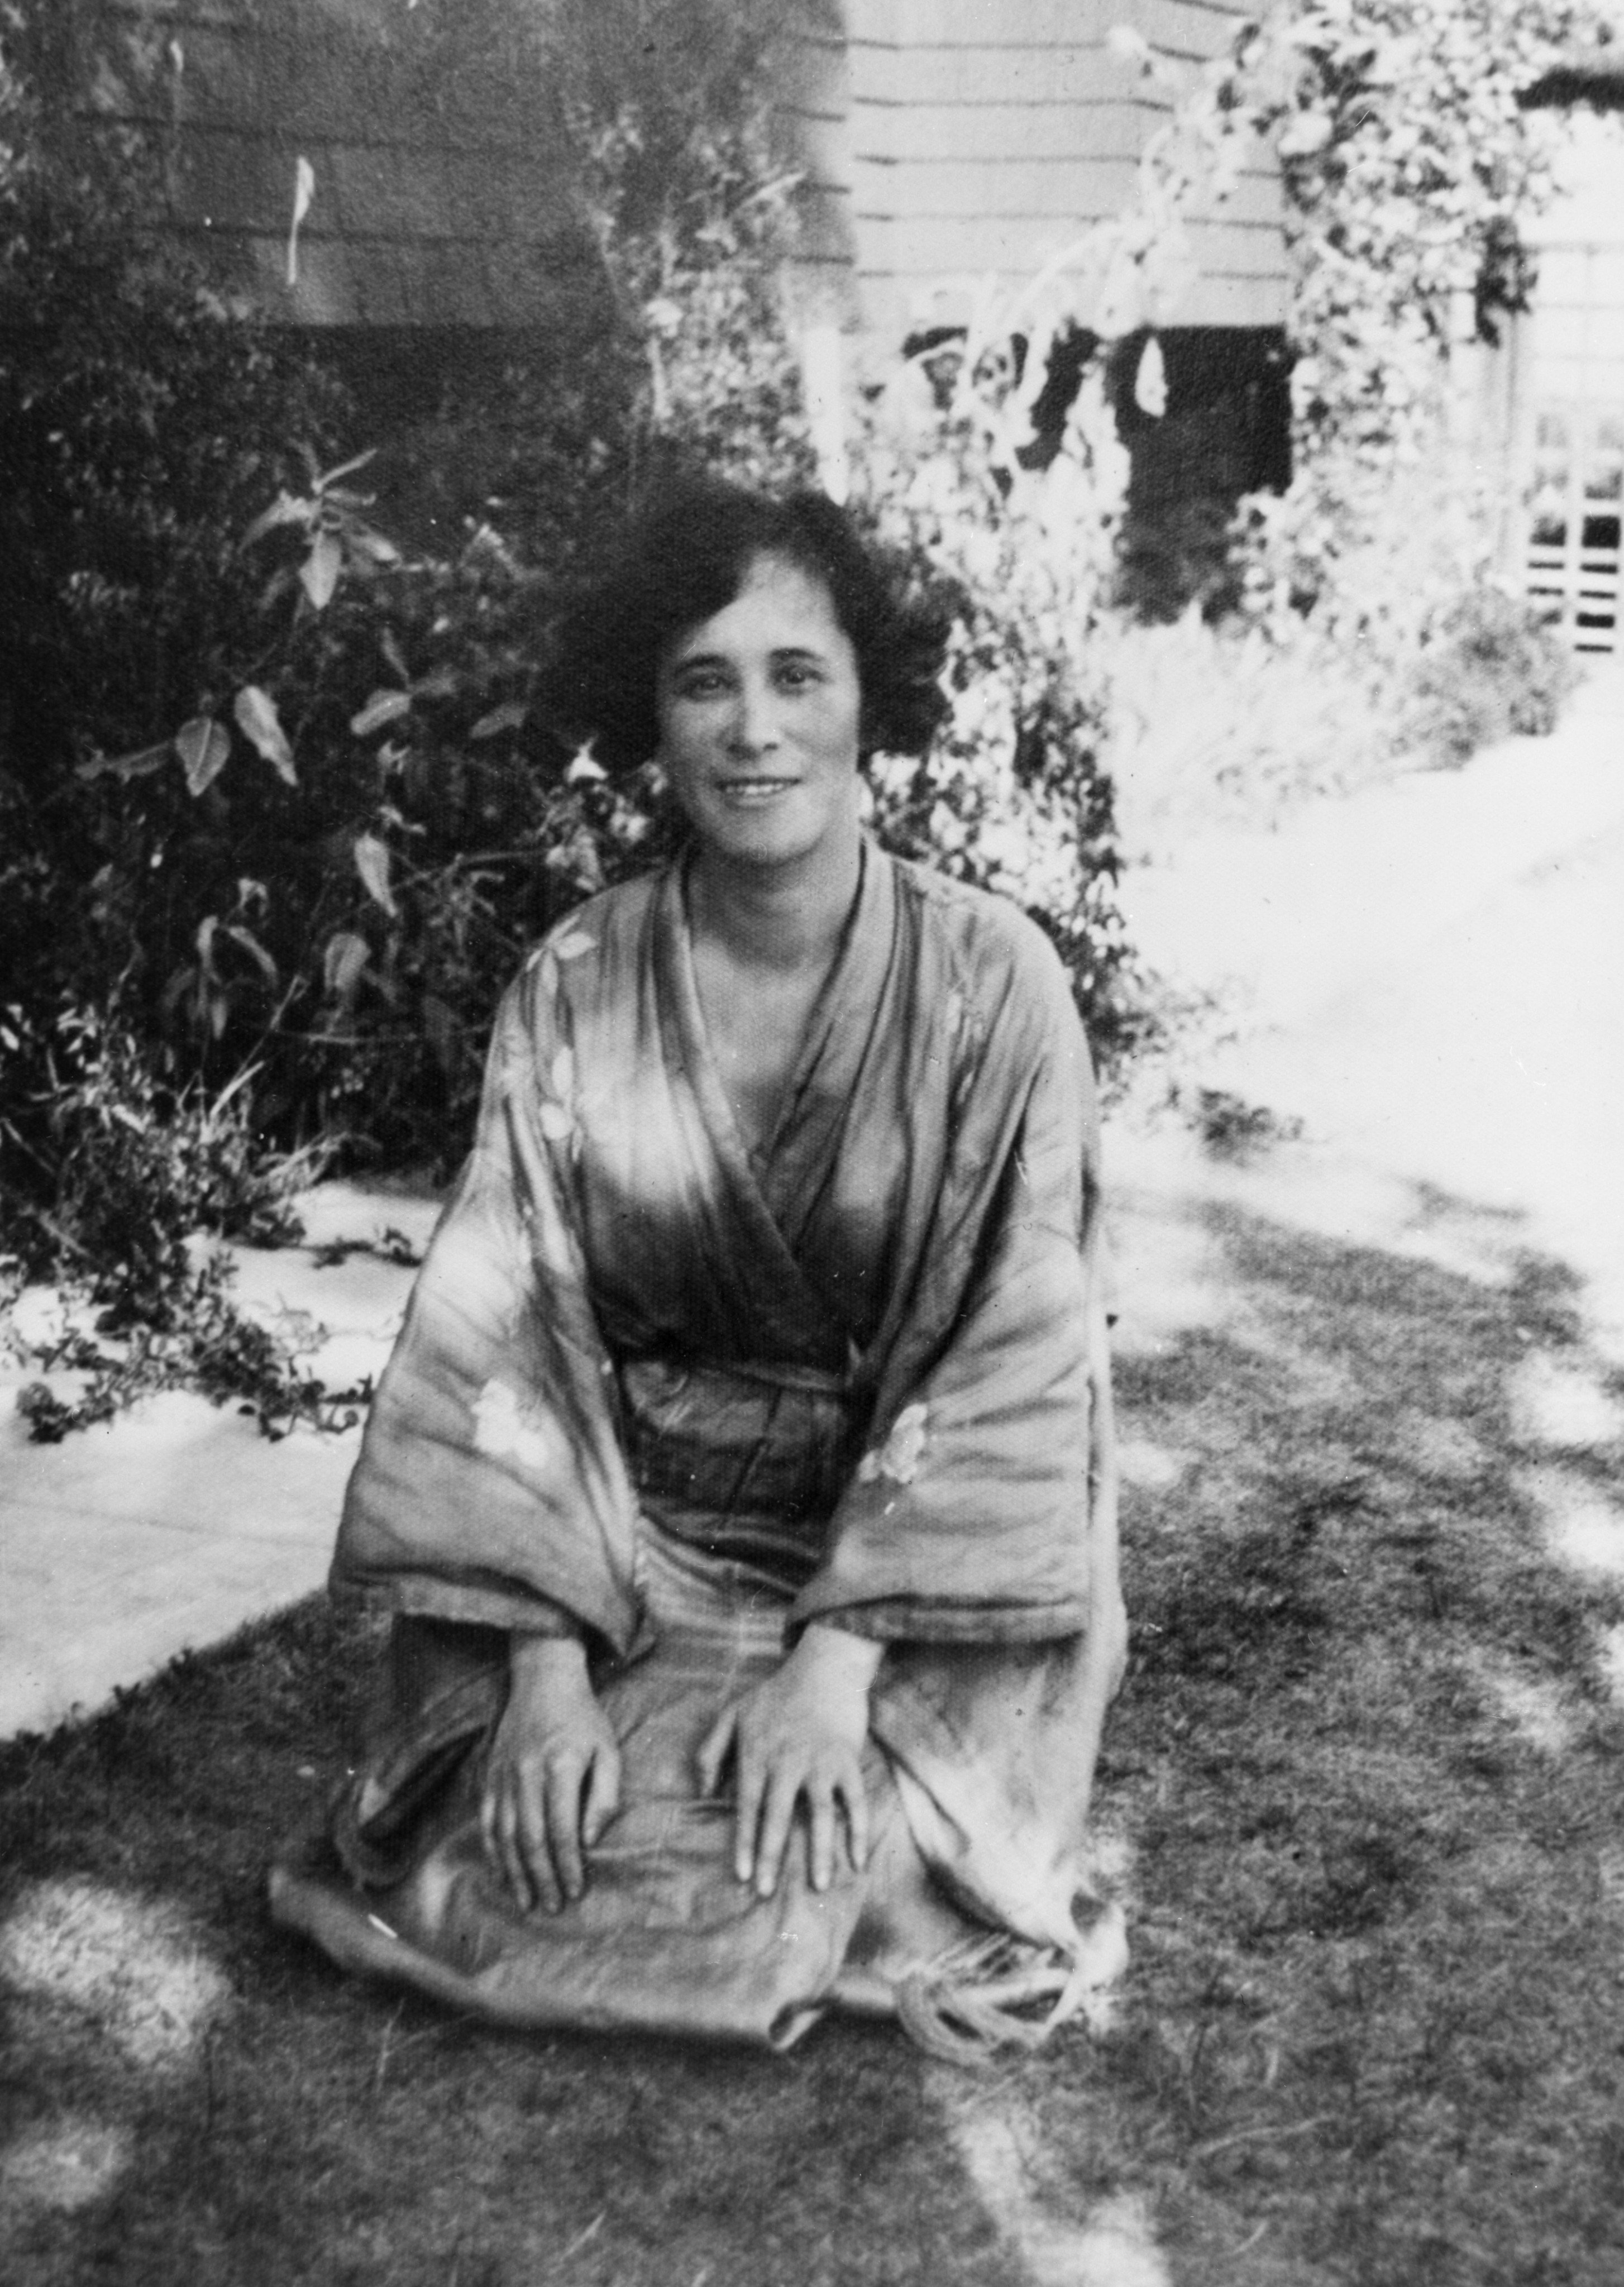 Winnifred Eaton was a Chinese-Canadian writer and said to have been the first novelist of Asian descent in North America. For years, however, the world knew her as Onoto Watanna – a Japanese nom de plume. Photo: University of Calgary